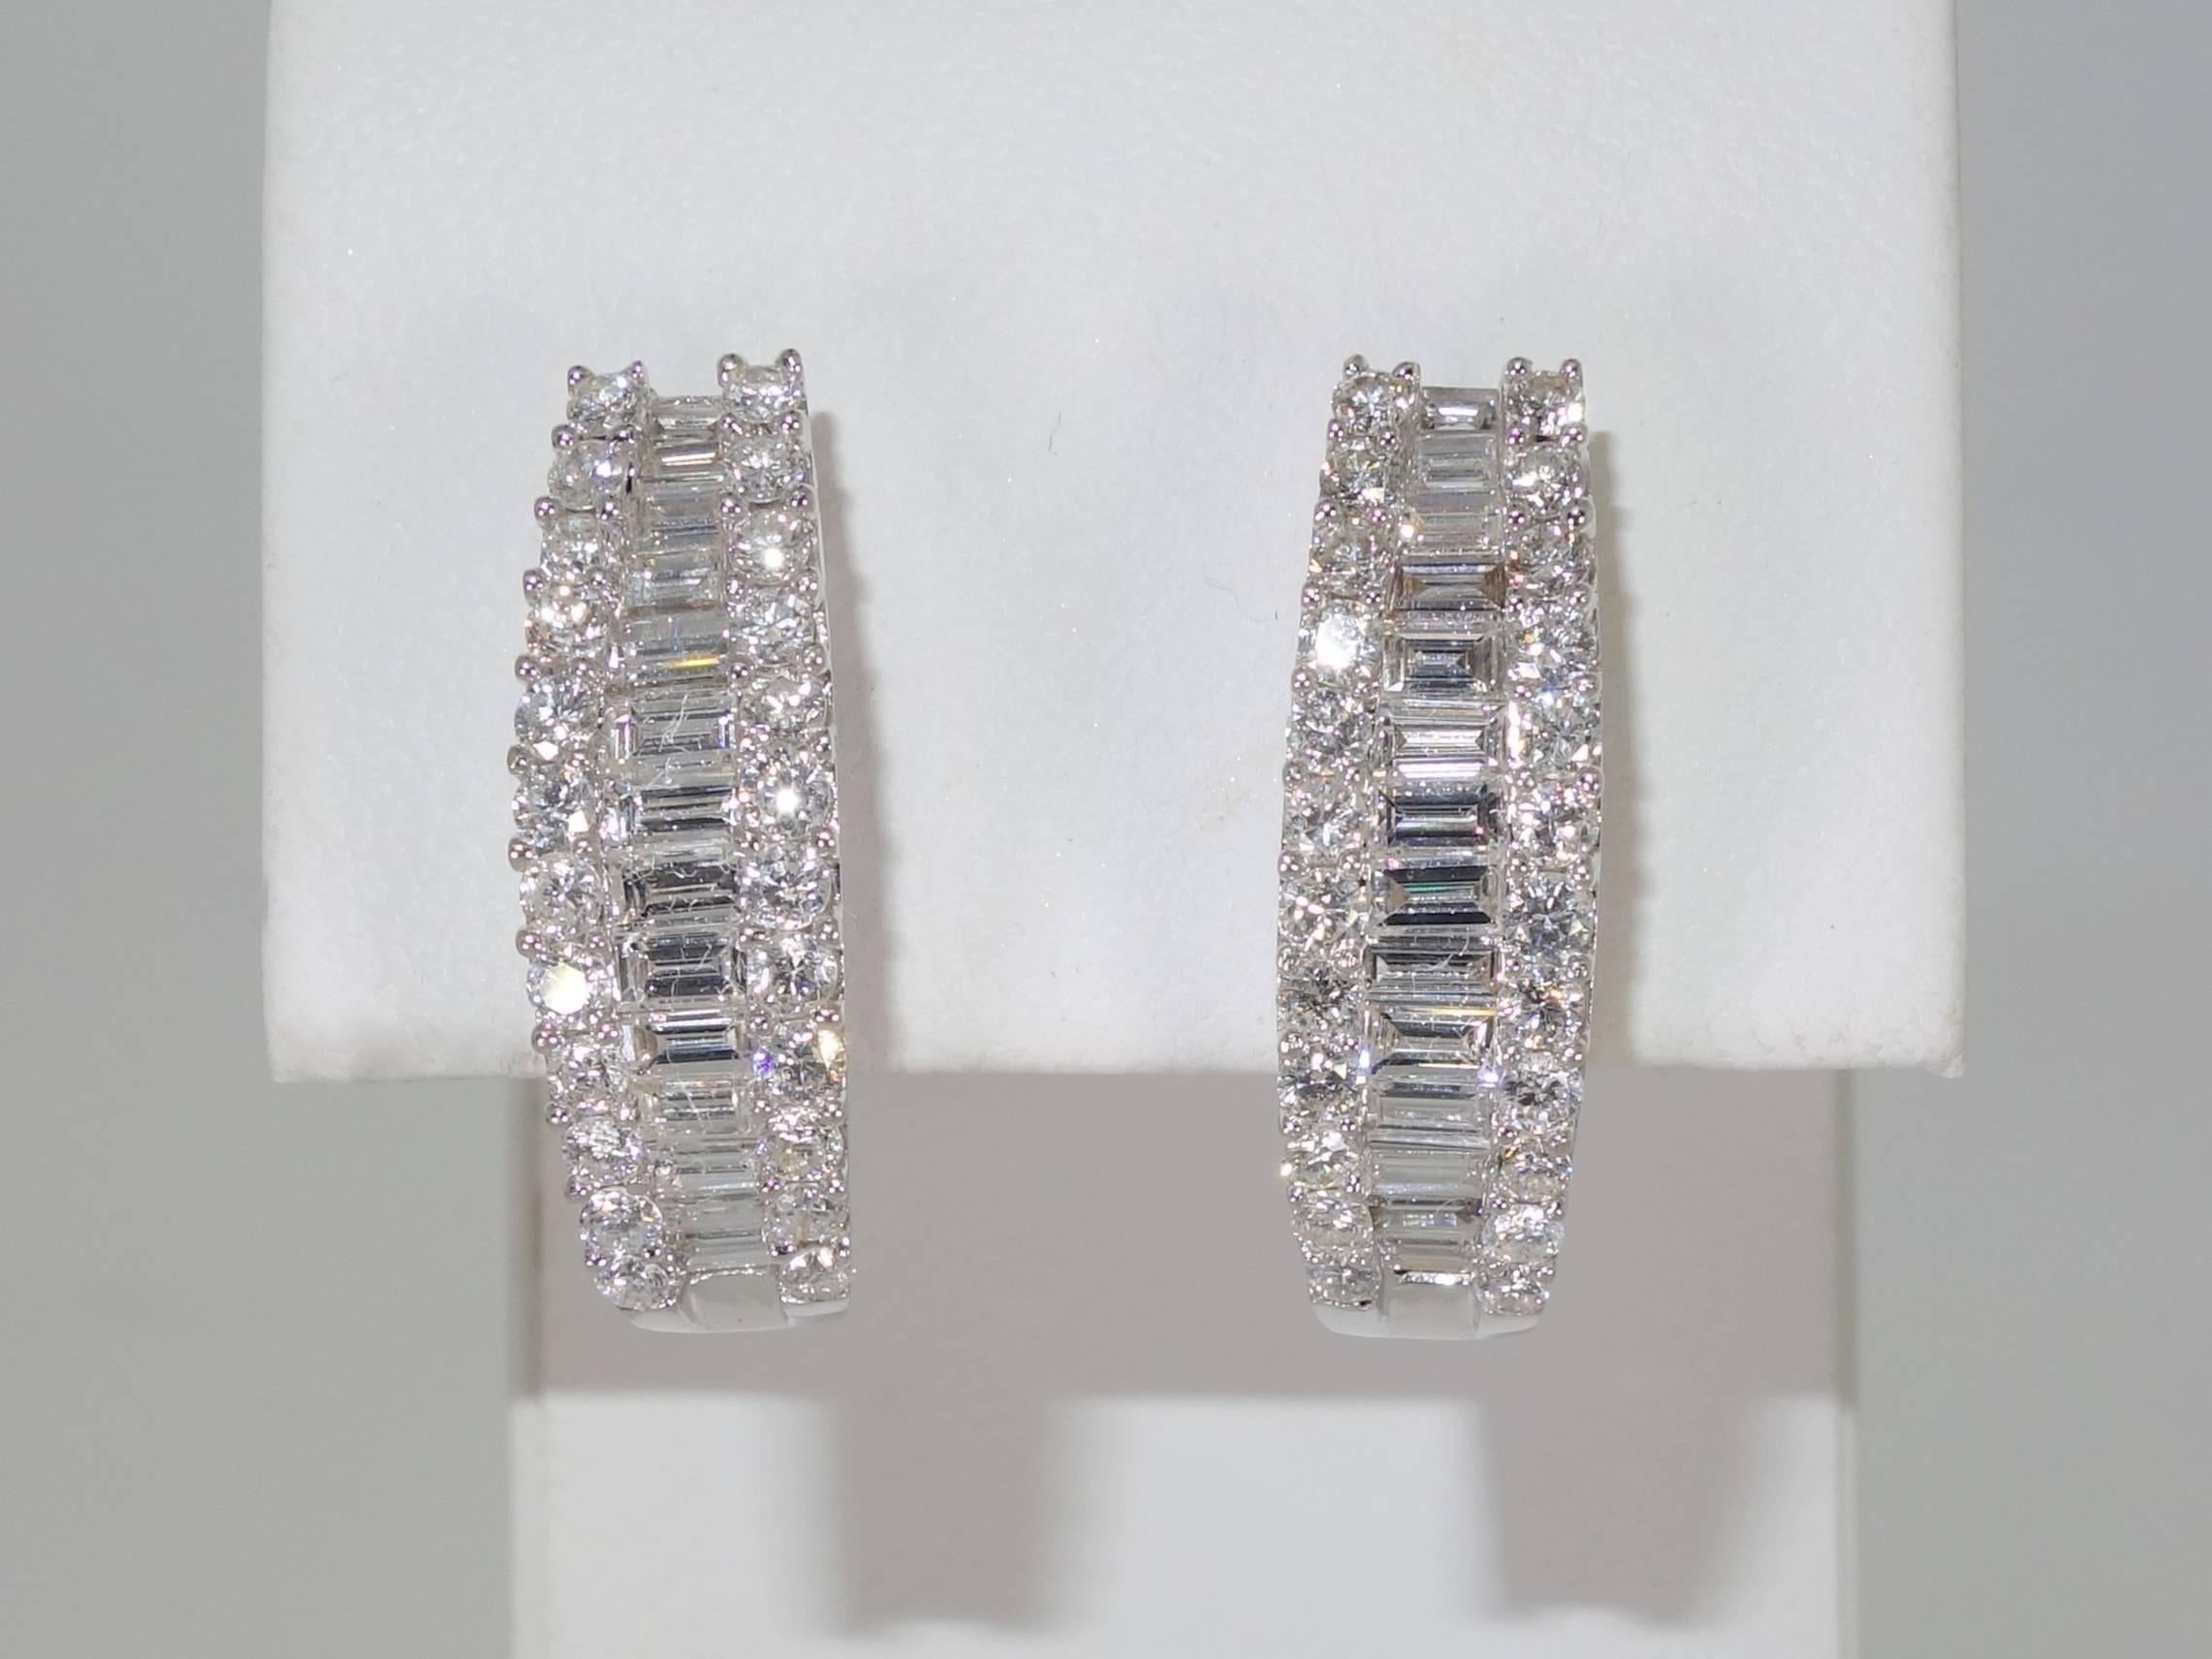 18K white gold possessing 2.20 cts.  These diamonds are white and clean! (near colorless G/H and very slightly included).  There are 28 baguette cut diamonds in the center and 48 round modern brilliant cut diamonds on the edges.  The earrings are